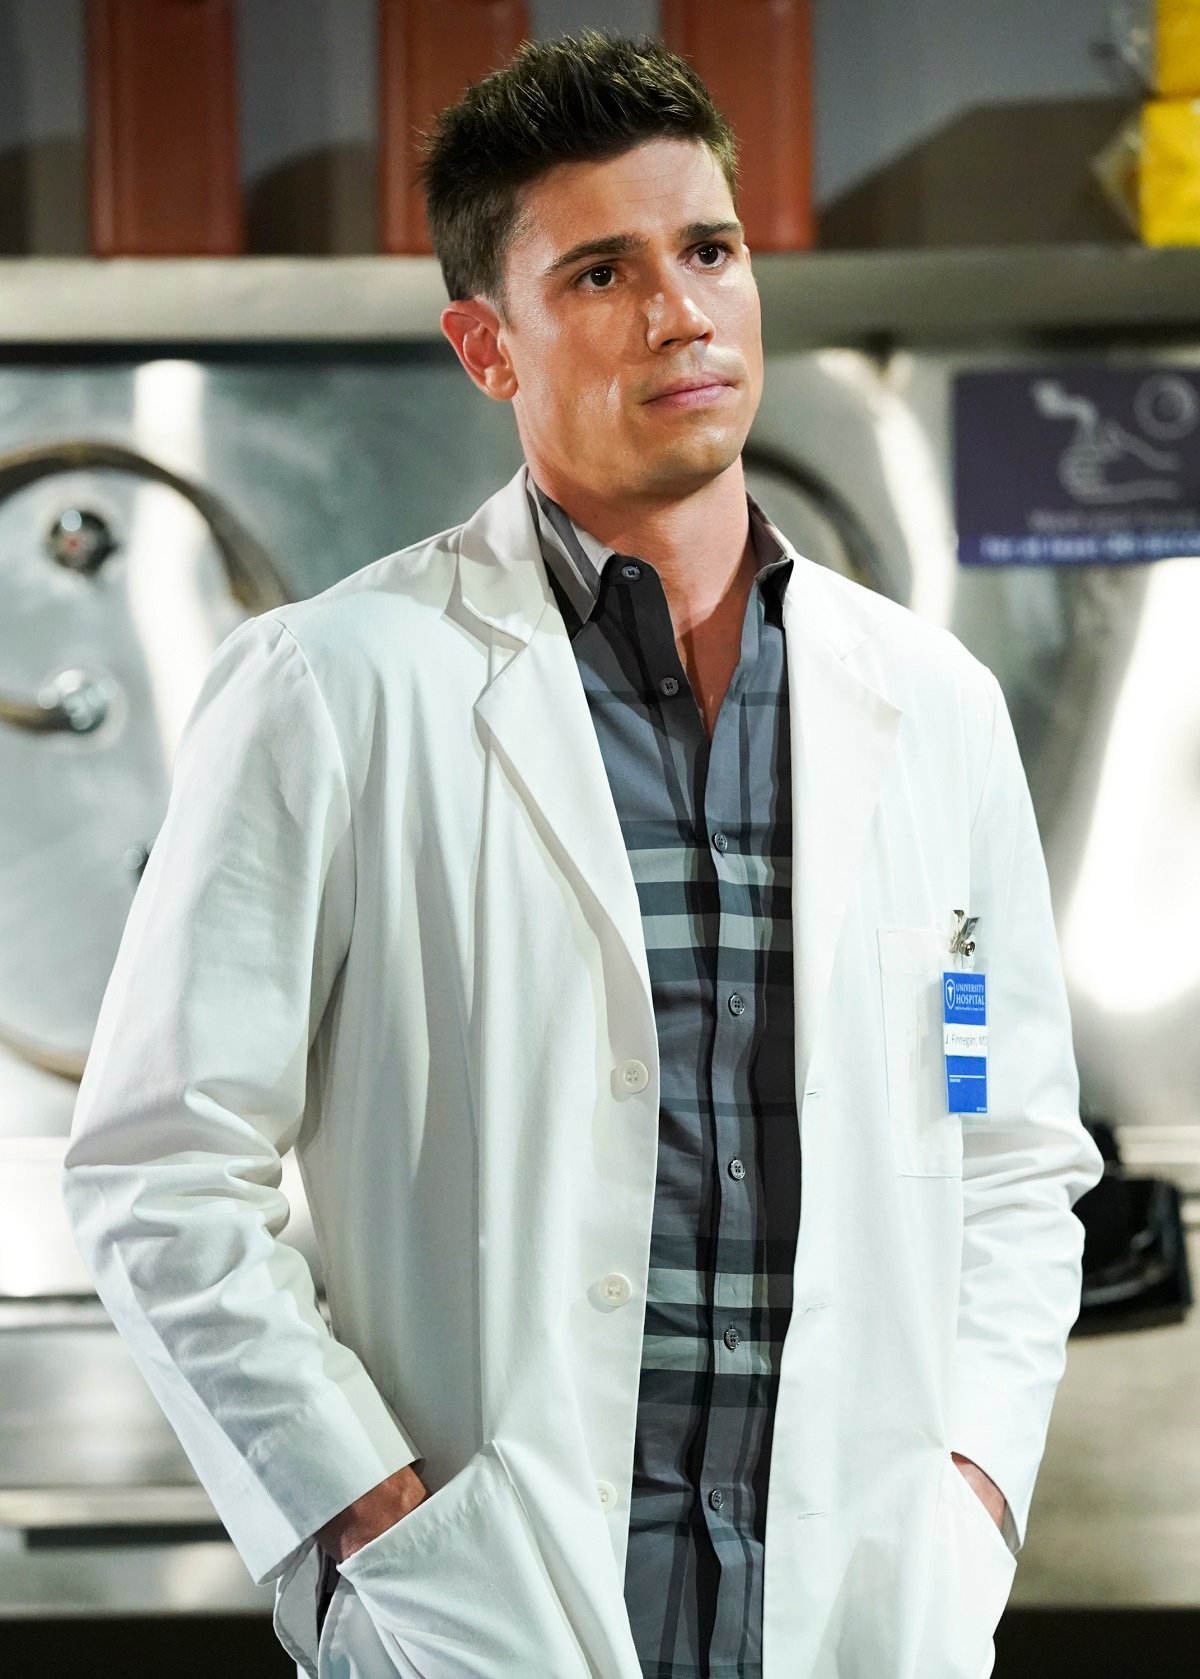 'The Bold and the Beautiful' actor Tanner Novlan wearing a blue plaid shirt and a white lab coat.